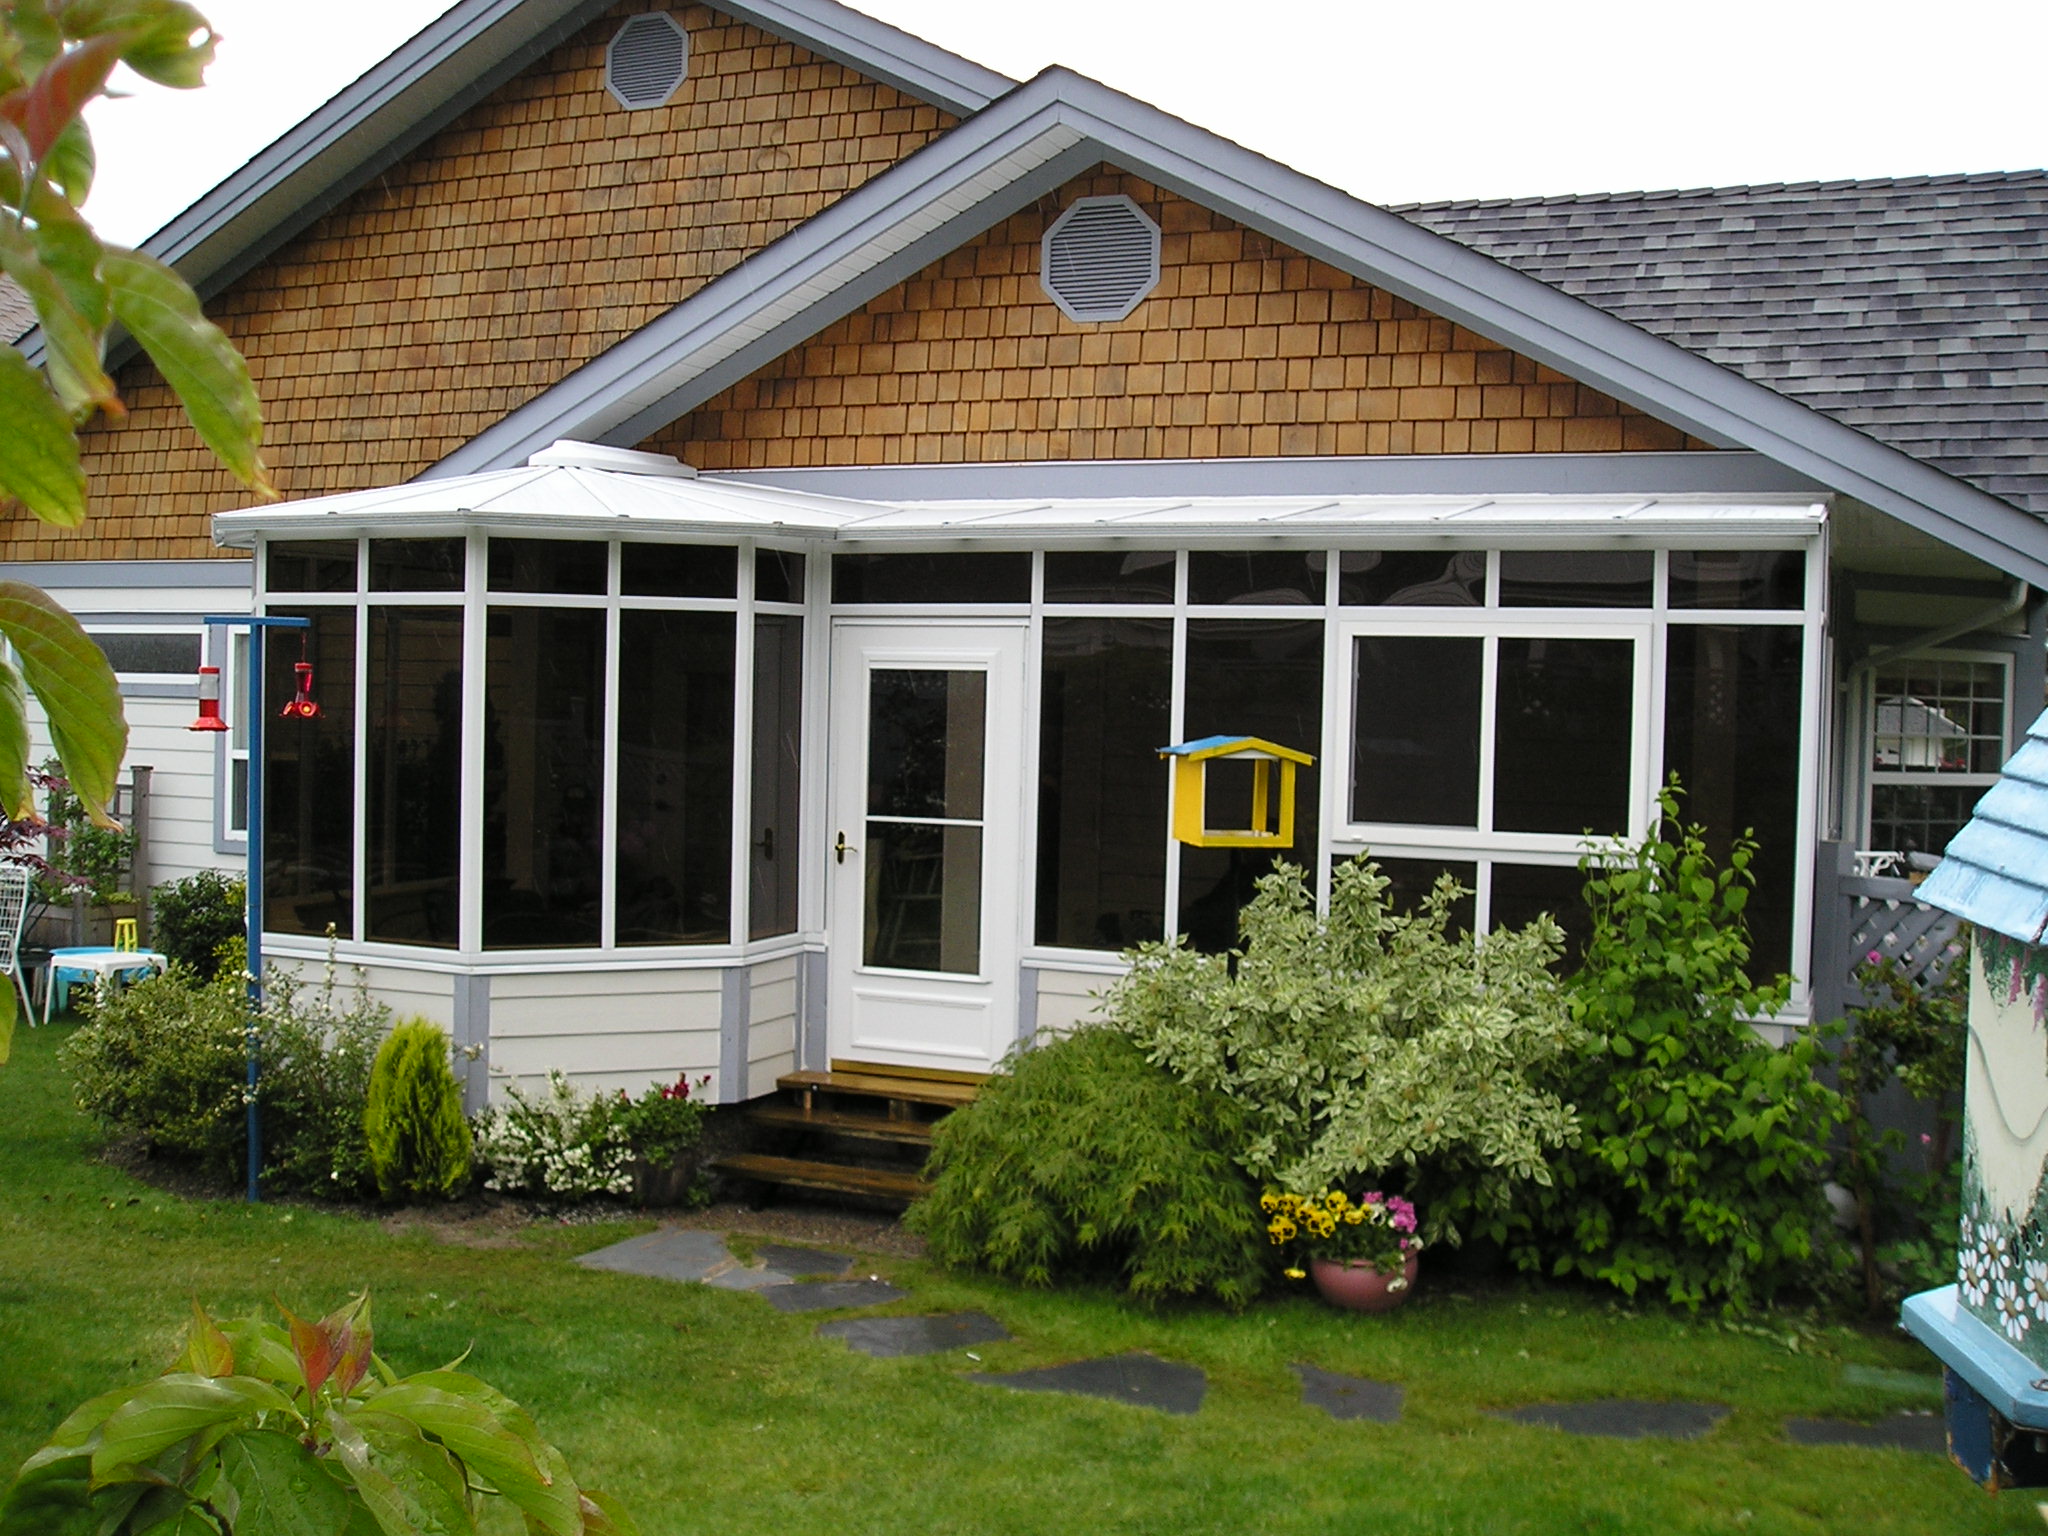 A combined sunroom and conservatory on the back of a house